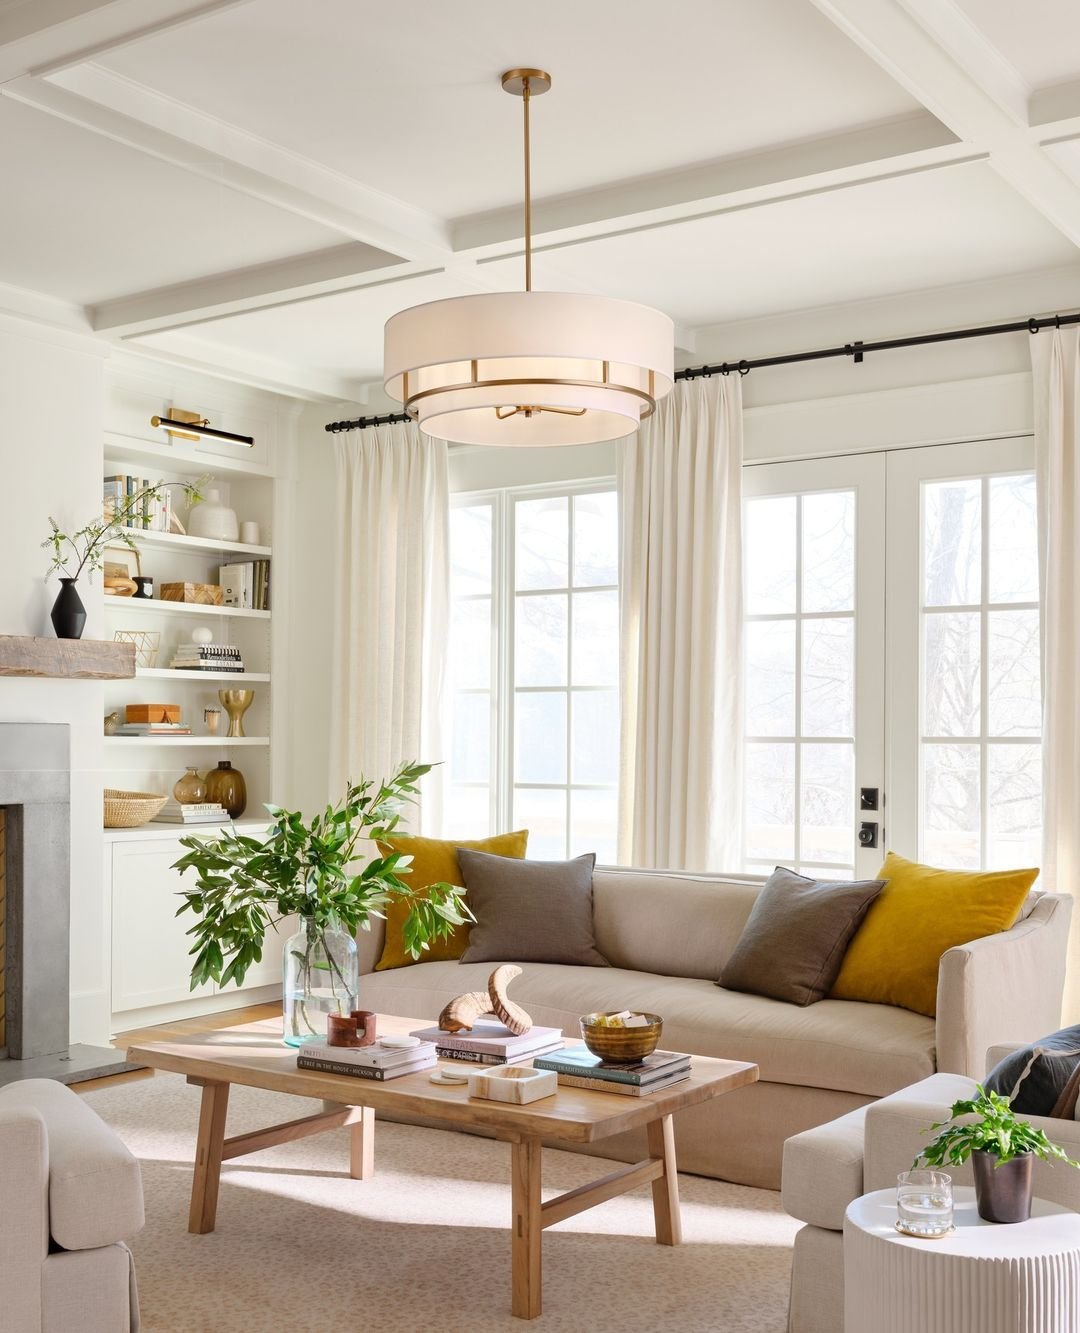 Embracing the weather as winter approaches with the Graham Pendant and Regis Picture Light. With their warm glow and airy feel, they bring in all the positive vibes!⁠
⁠
💡: Graham, Regis⁠ from Hinkley